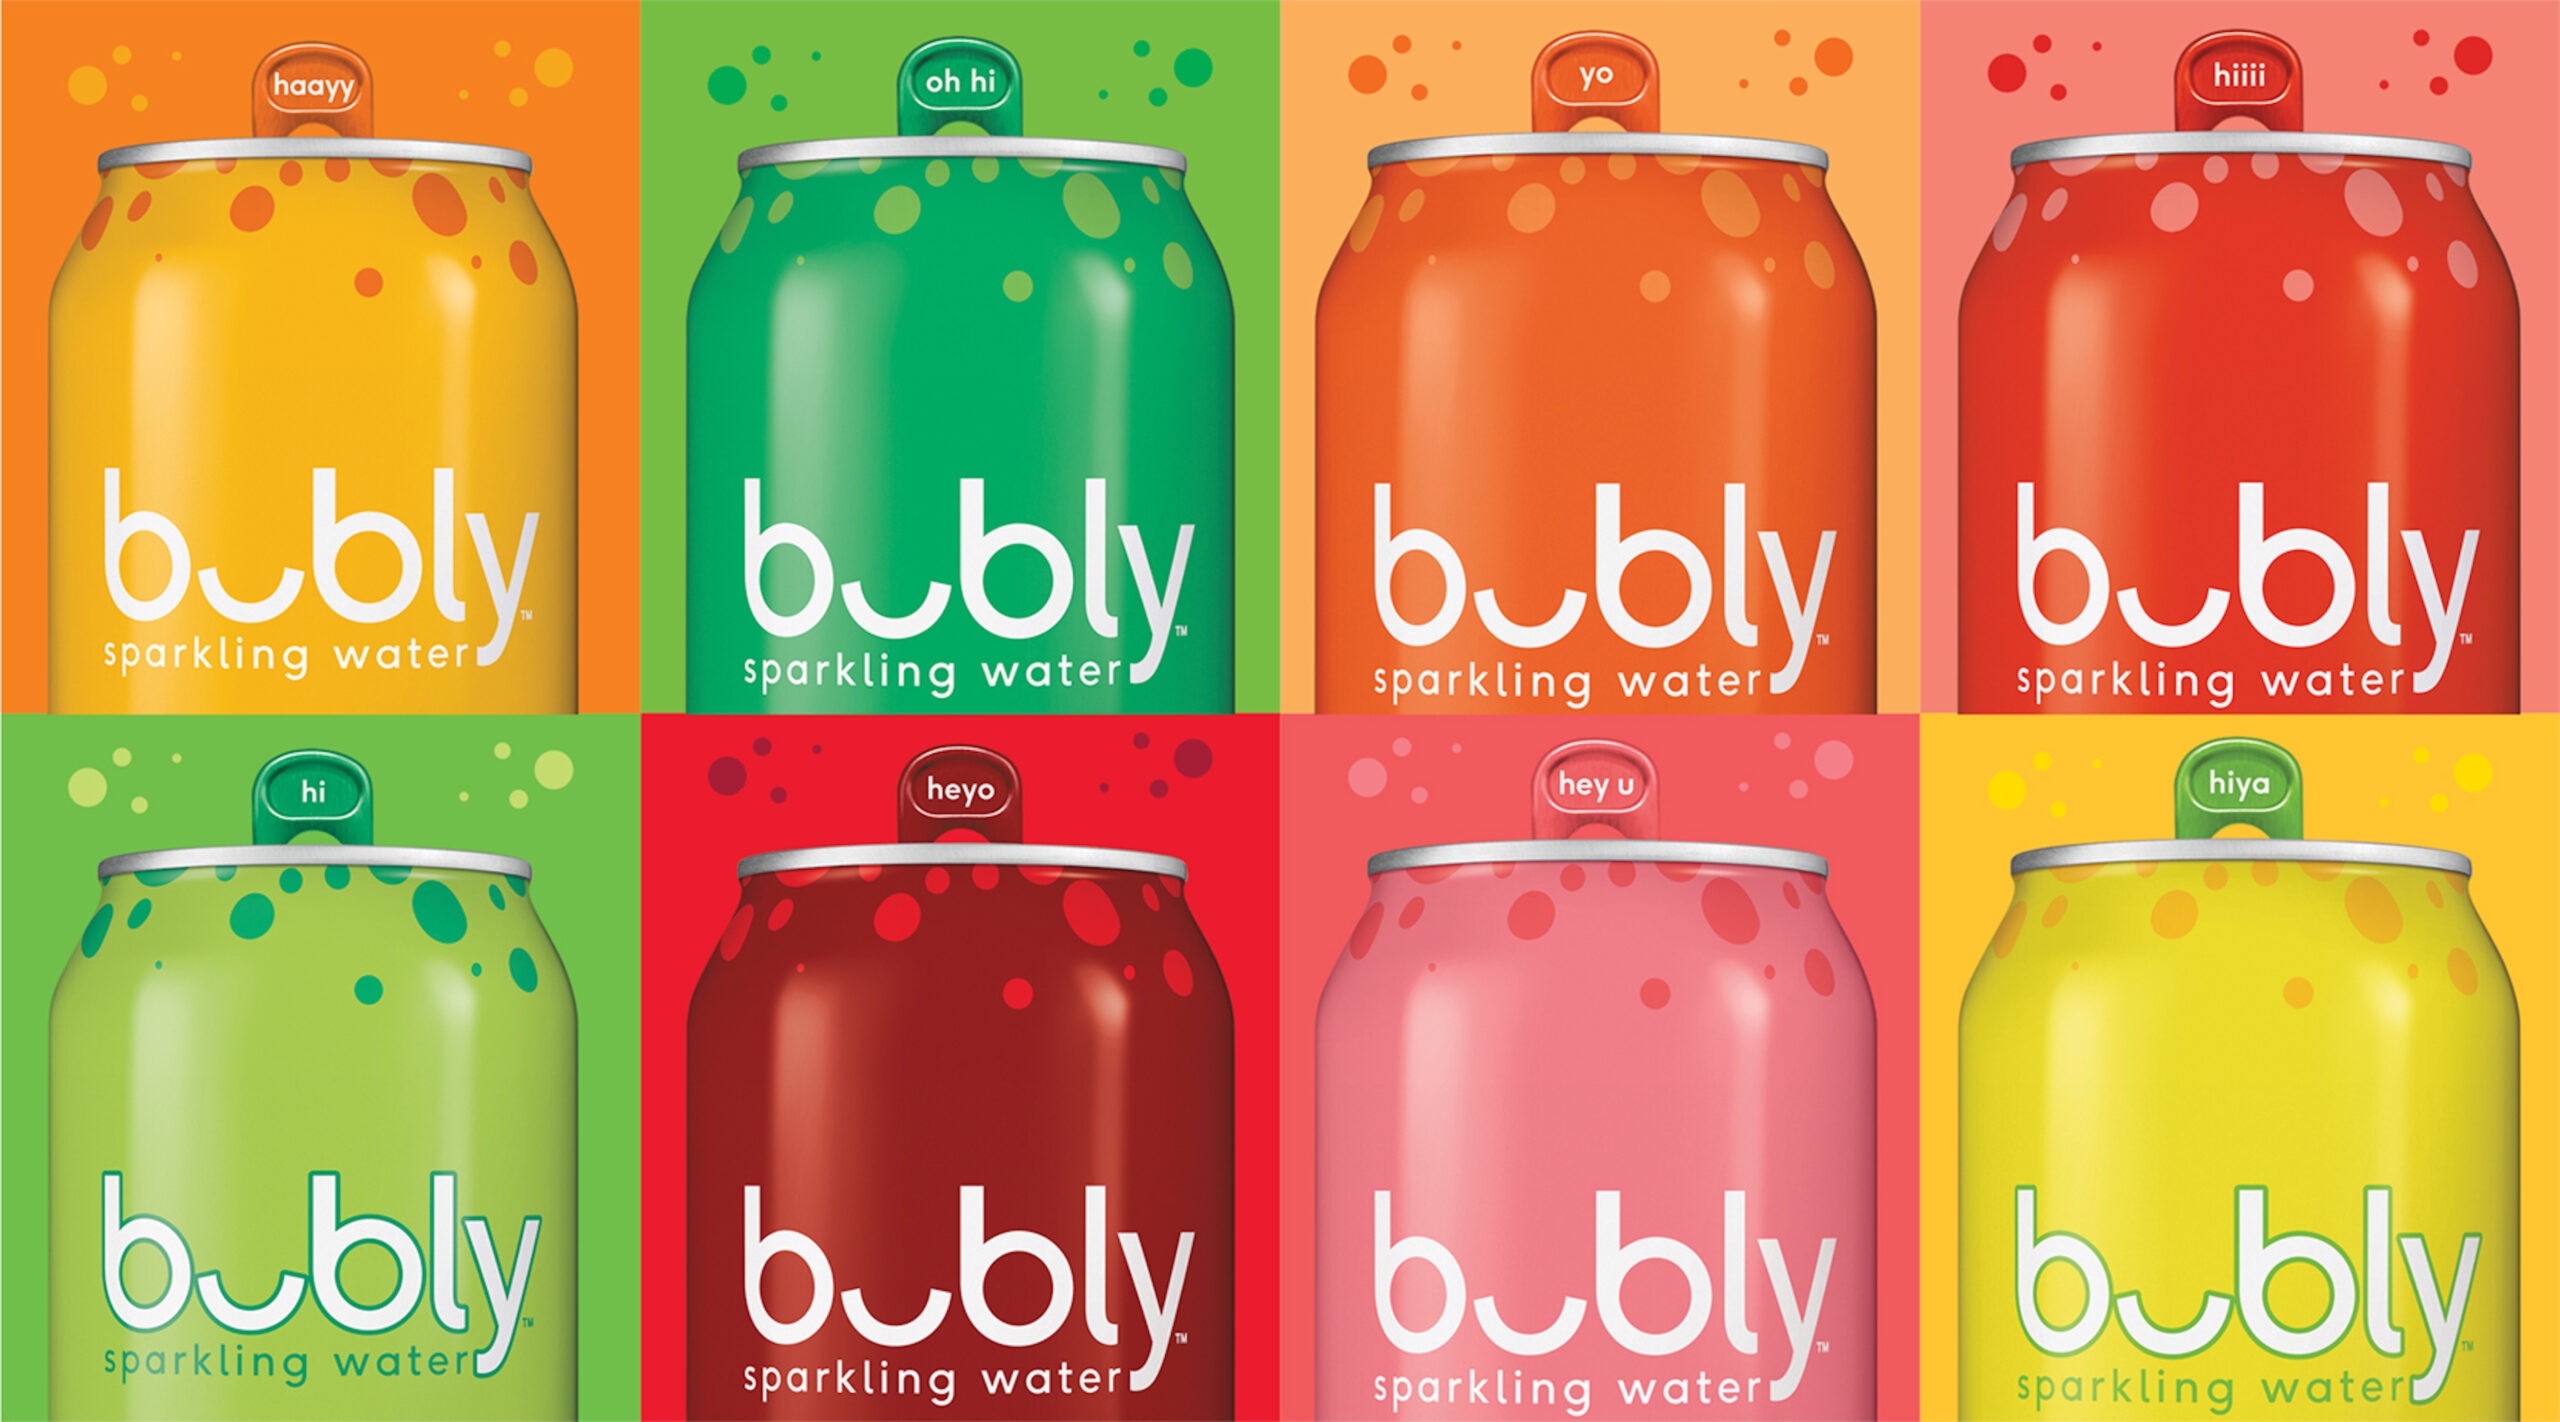 Eight different colored cans of bubly seltzer water. The company employs smart packaging to create an experience for customers when they open the pull tab.